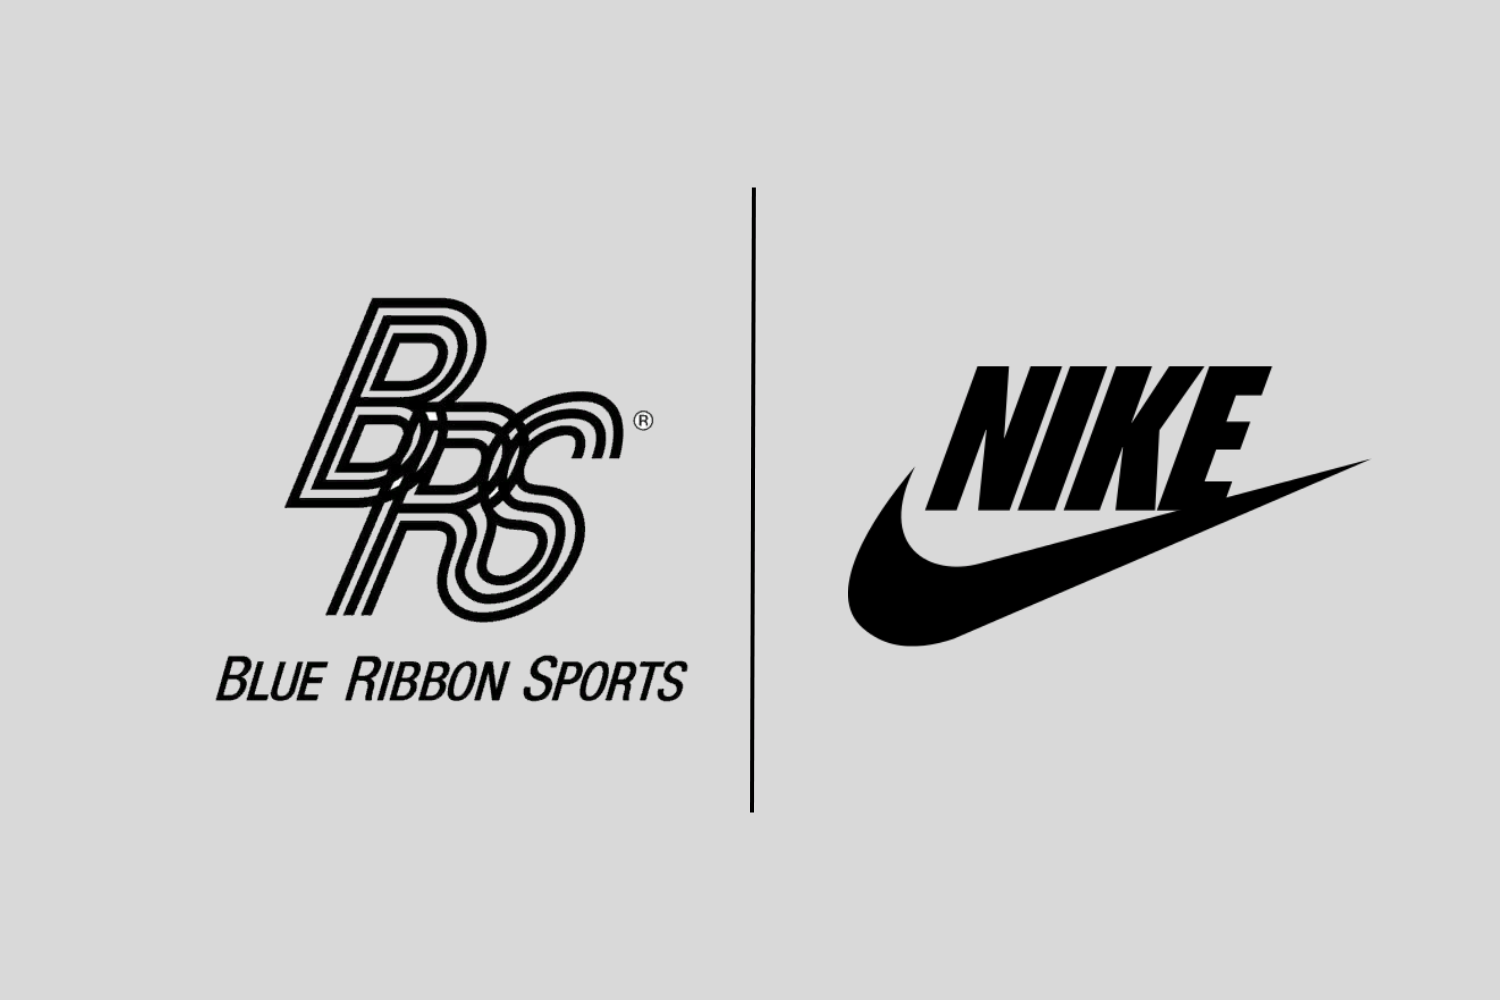 How Phil Knight made history 60 years ago by founding Blue Ribbon Sports